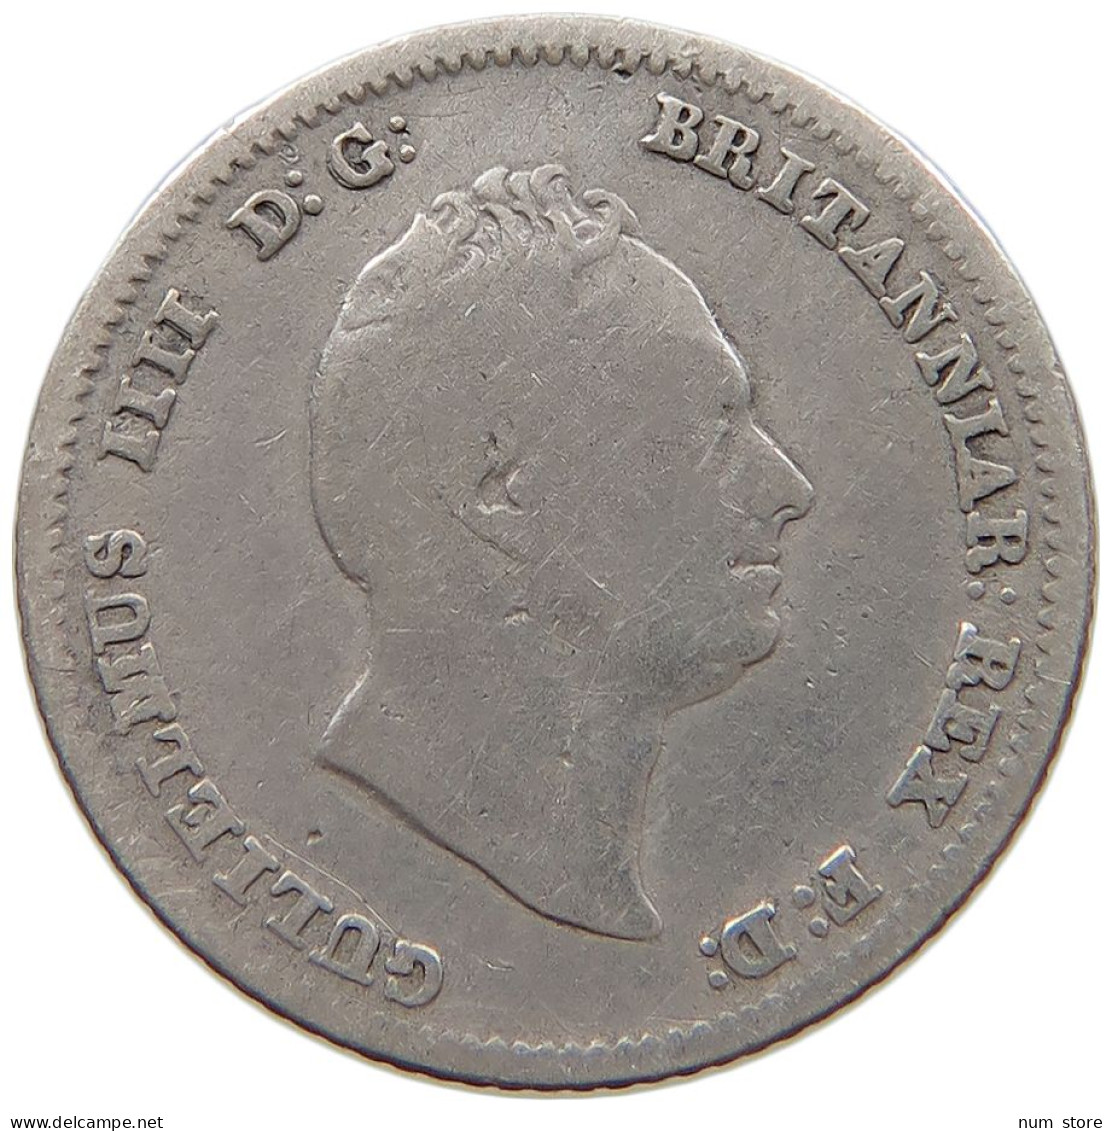 GREAT BRITAIN FOURPENCE 1836 WILLIAM IV. (1830-1837) #MA 021192 - G. 4 Pence/ Groat